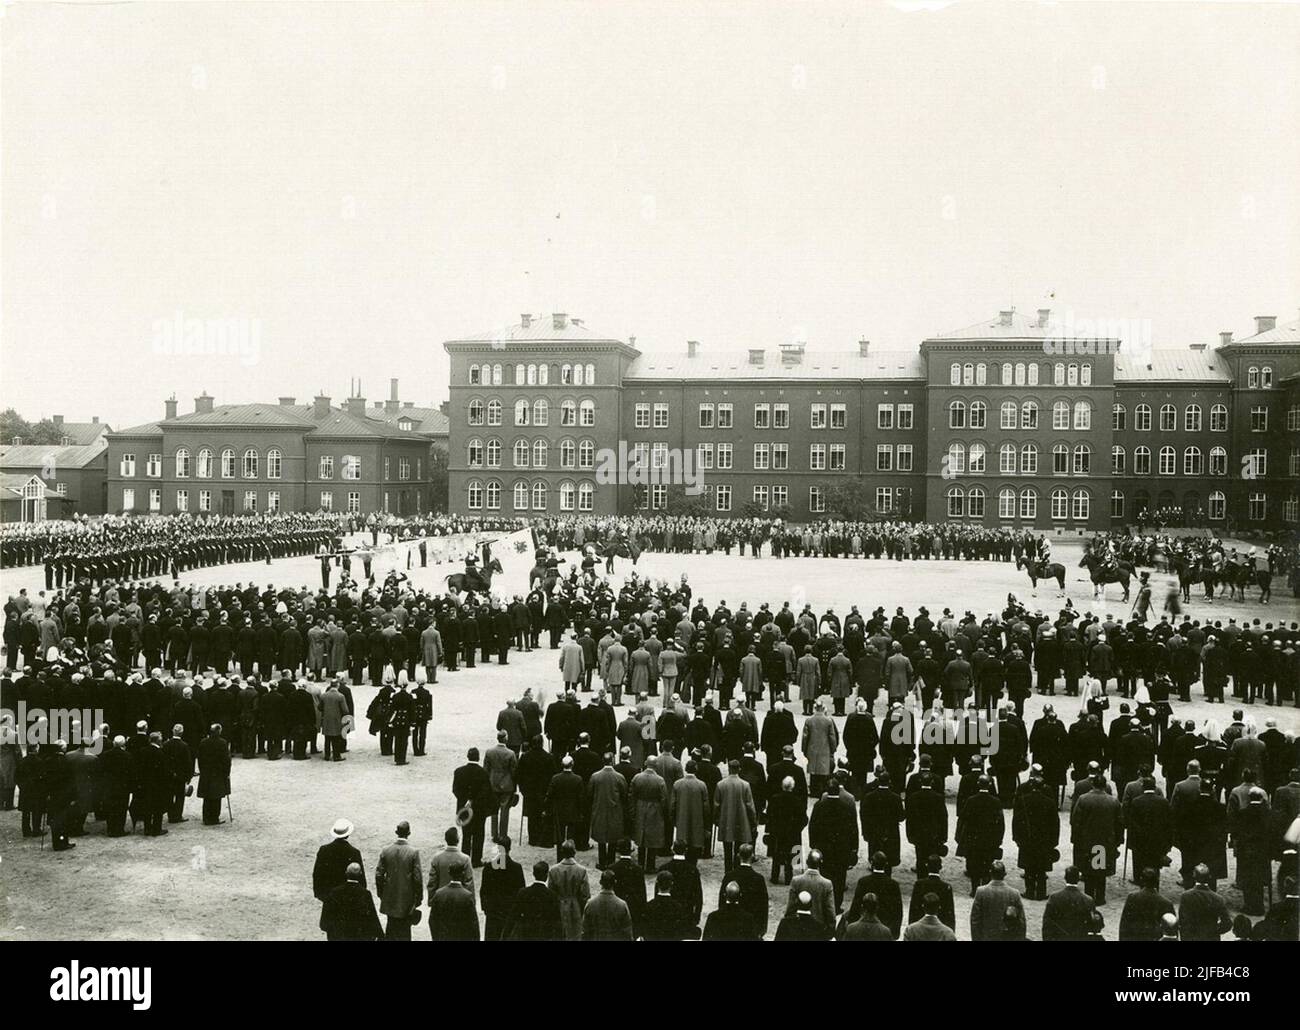 Position with flags and music choirs in the celebration of Svea Livgarde's 400th anniversary in 1921. Stock Photo